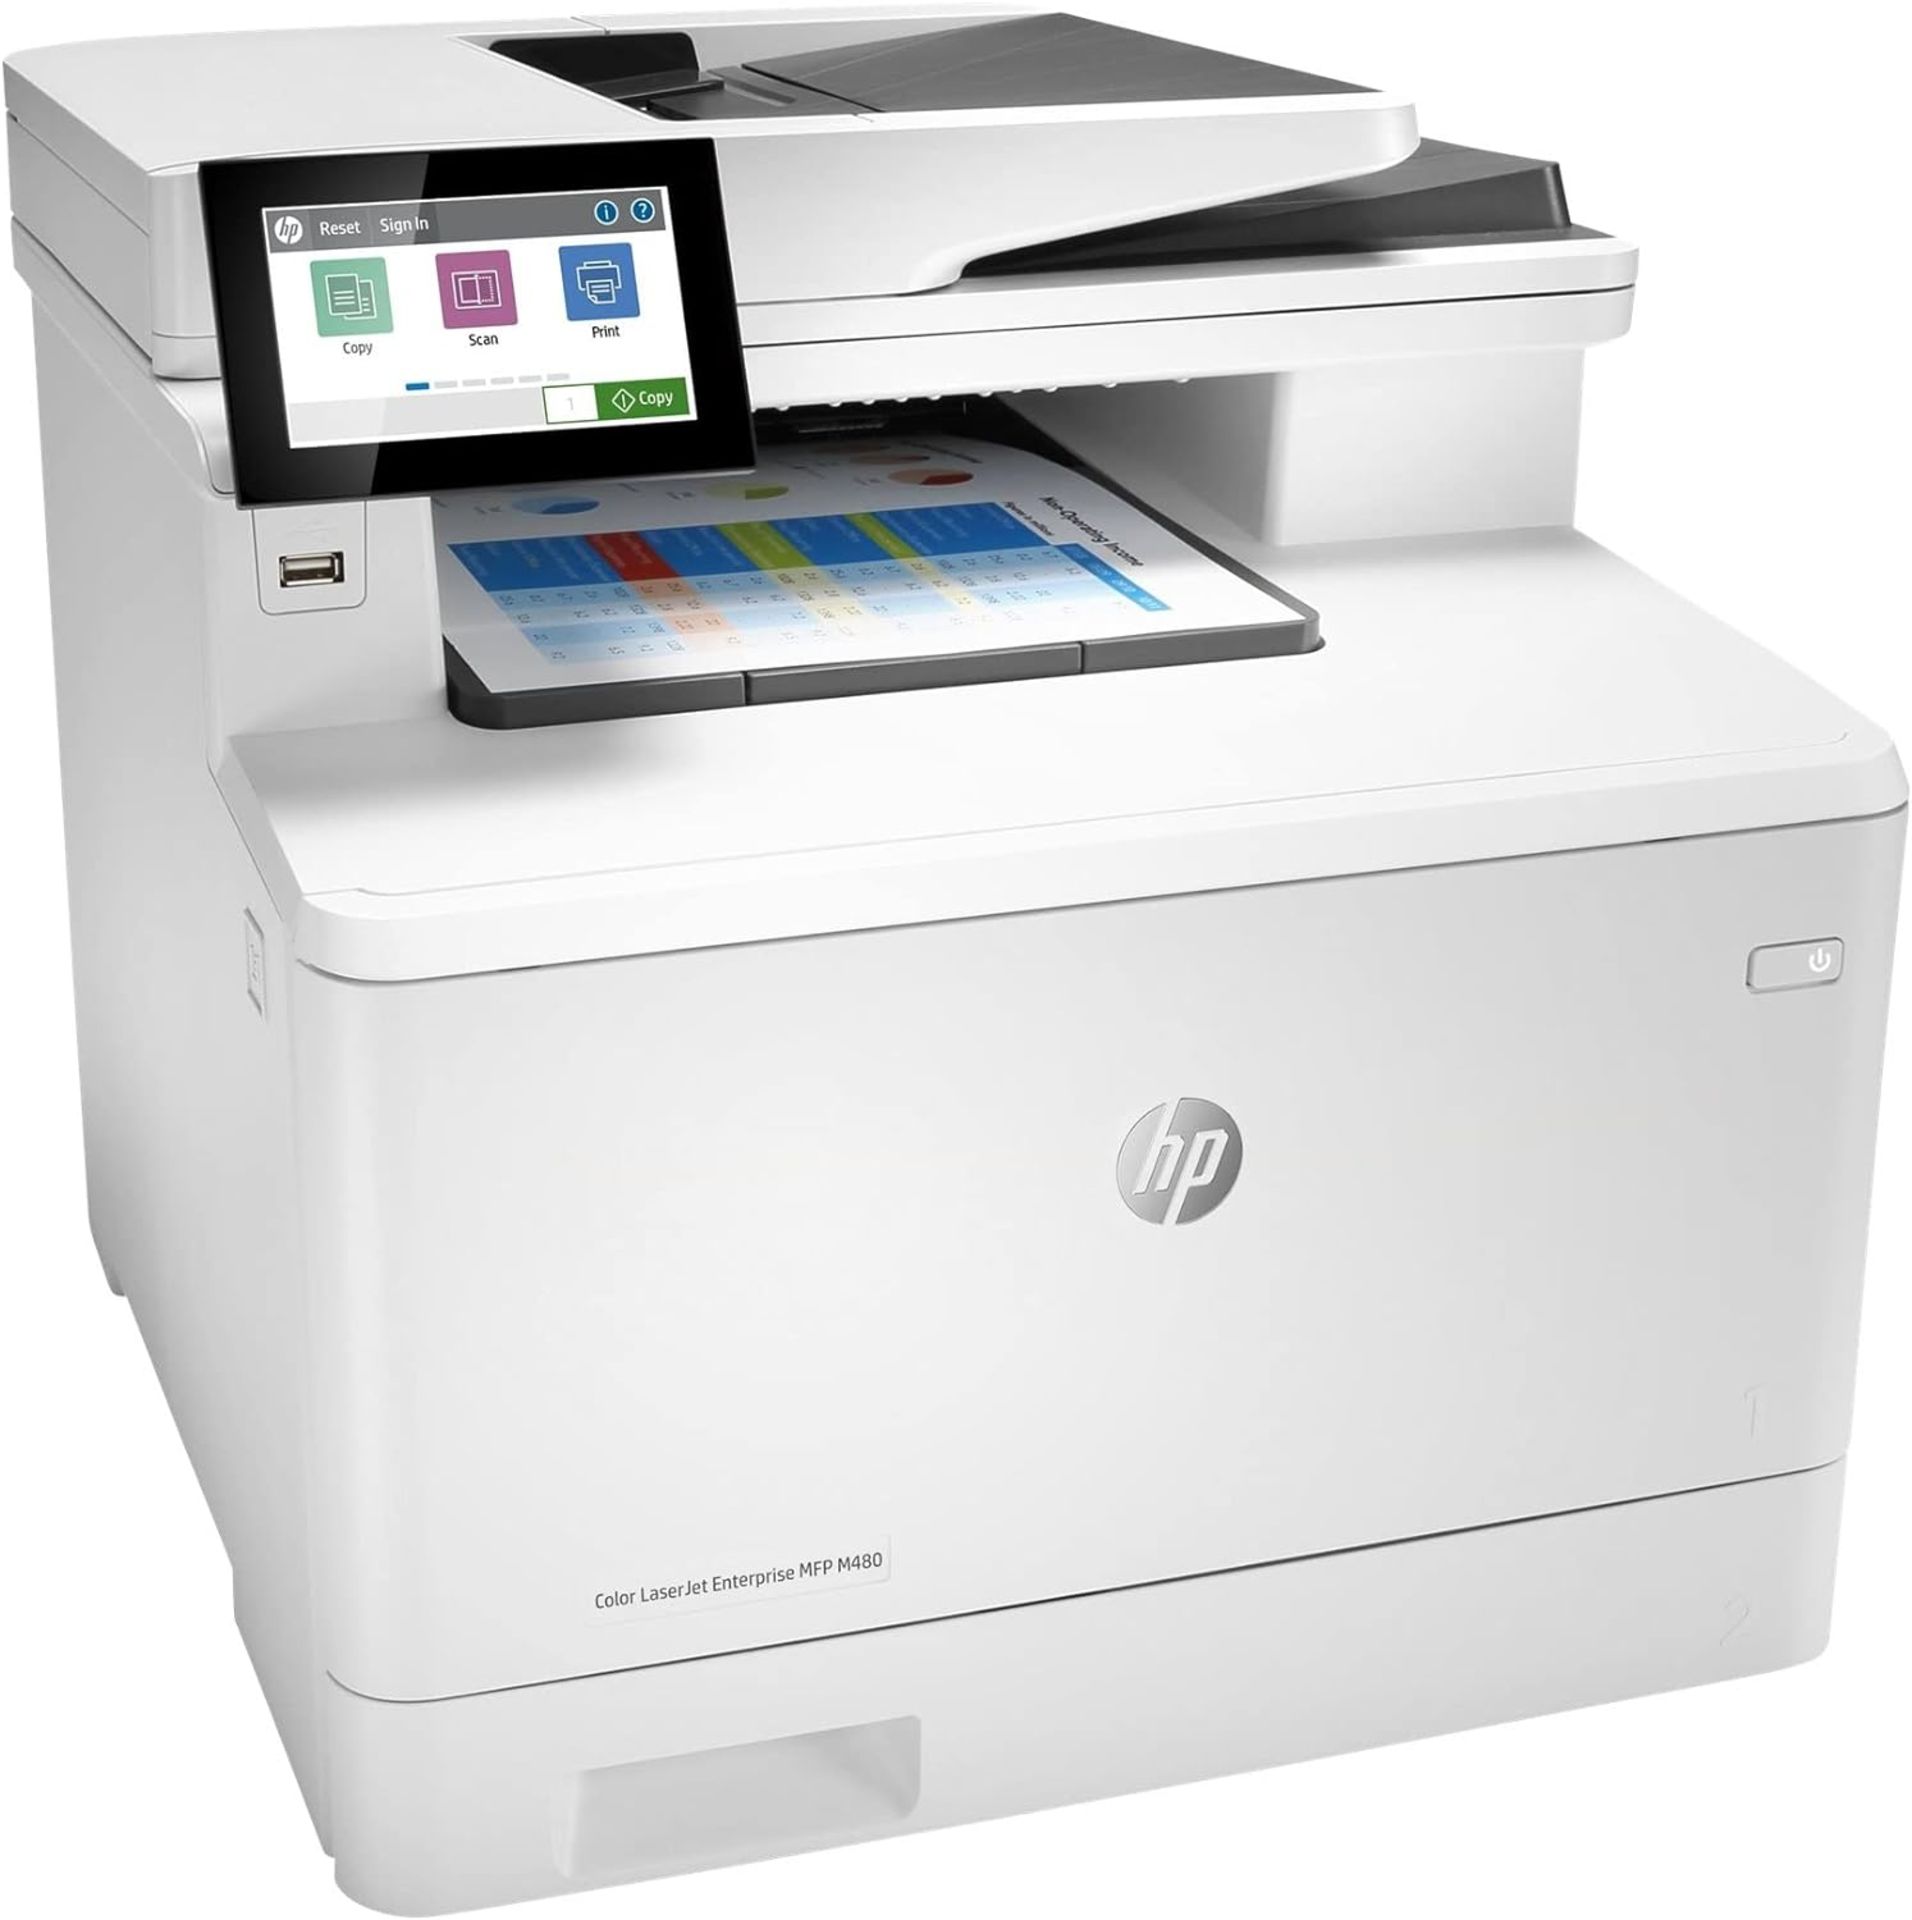 GRADE A HP Color LaserJet Enterprise MFP M480f. RRP £643. (PCK5). This printer is intended for use - Image 2 of 5